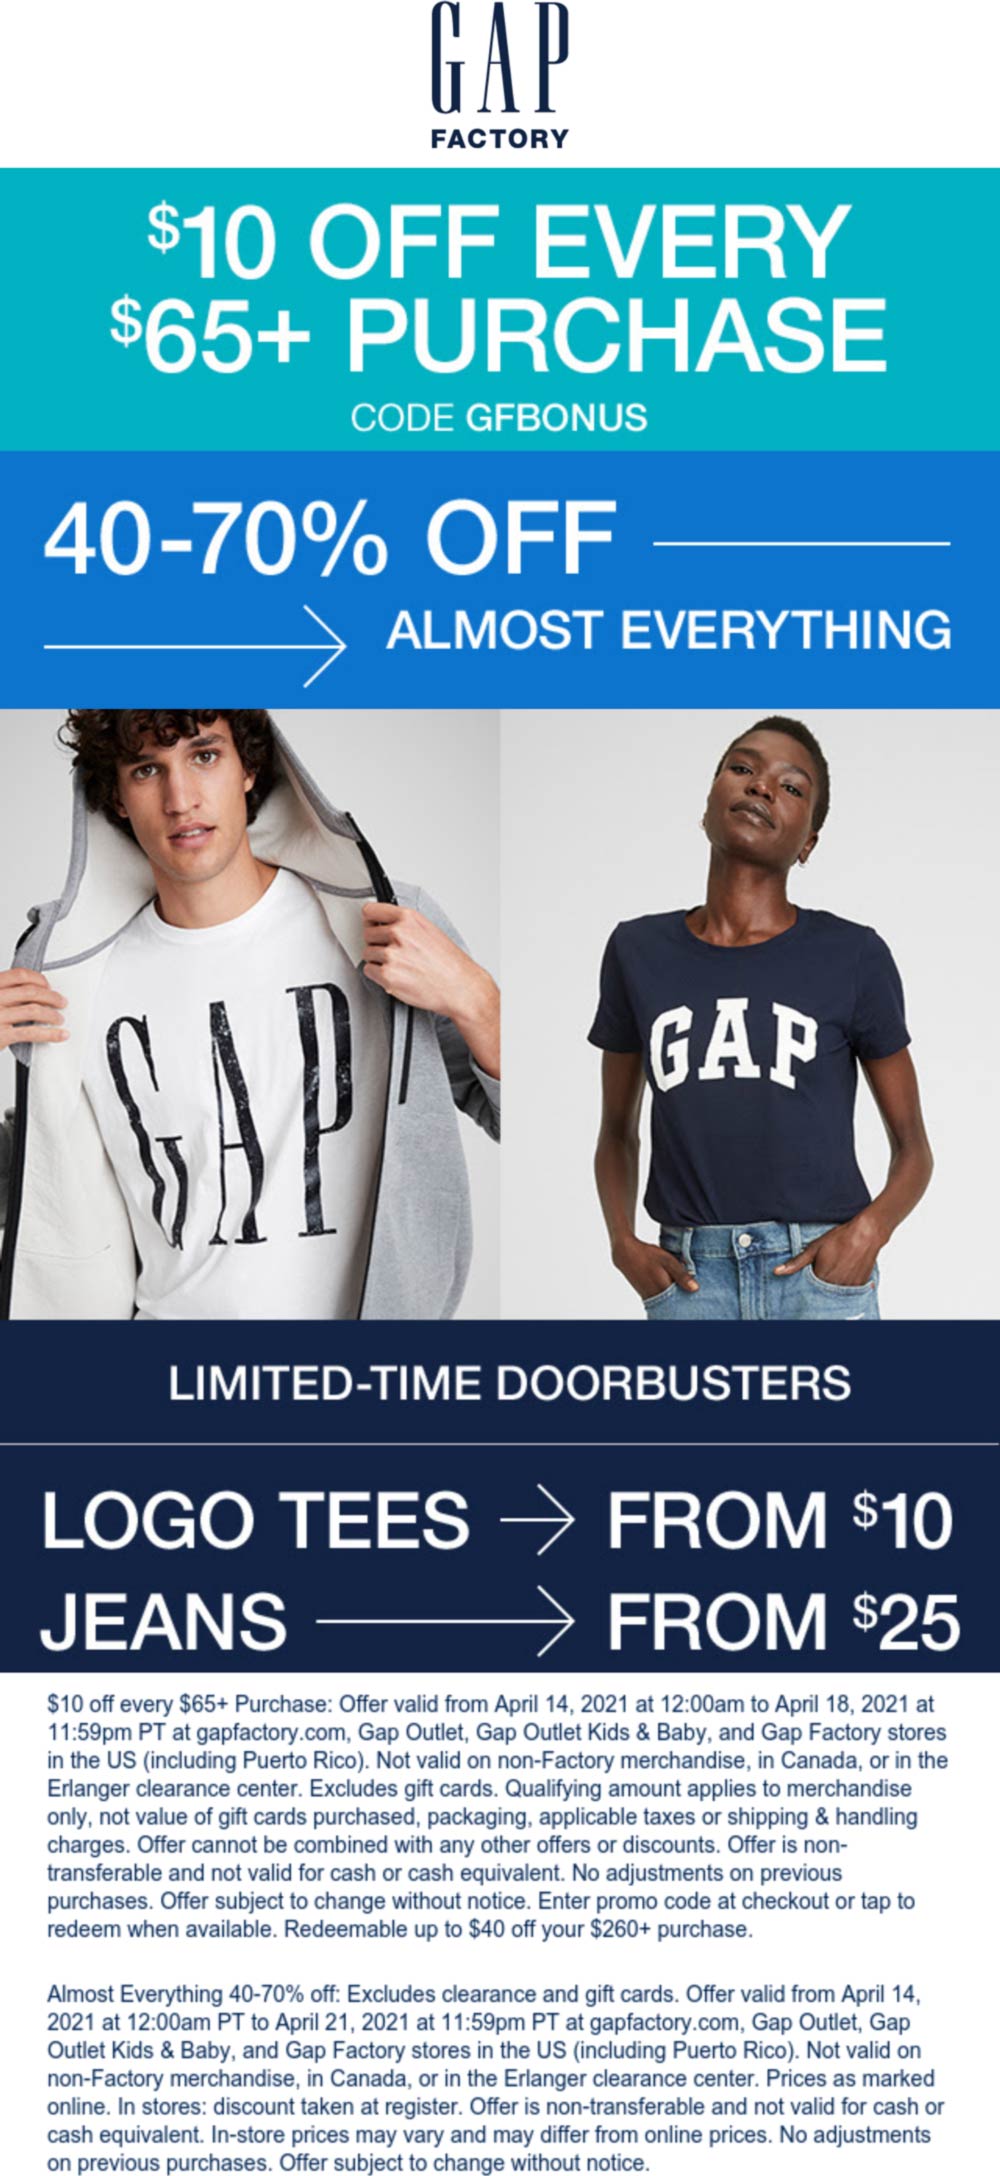 Gap Facotry stores Coupon  40-70% off everything + $10 off every $65 at Gap Facotry via promo code GFBONUS #gapfacotry 